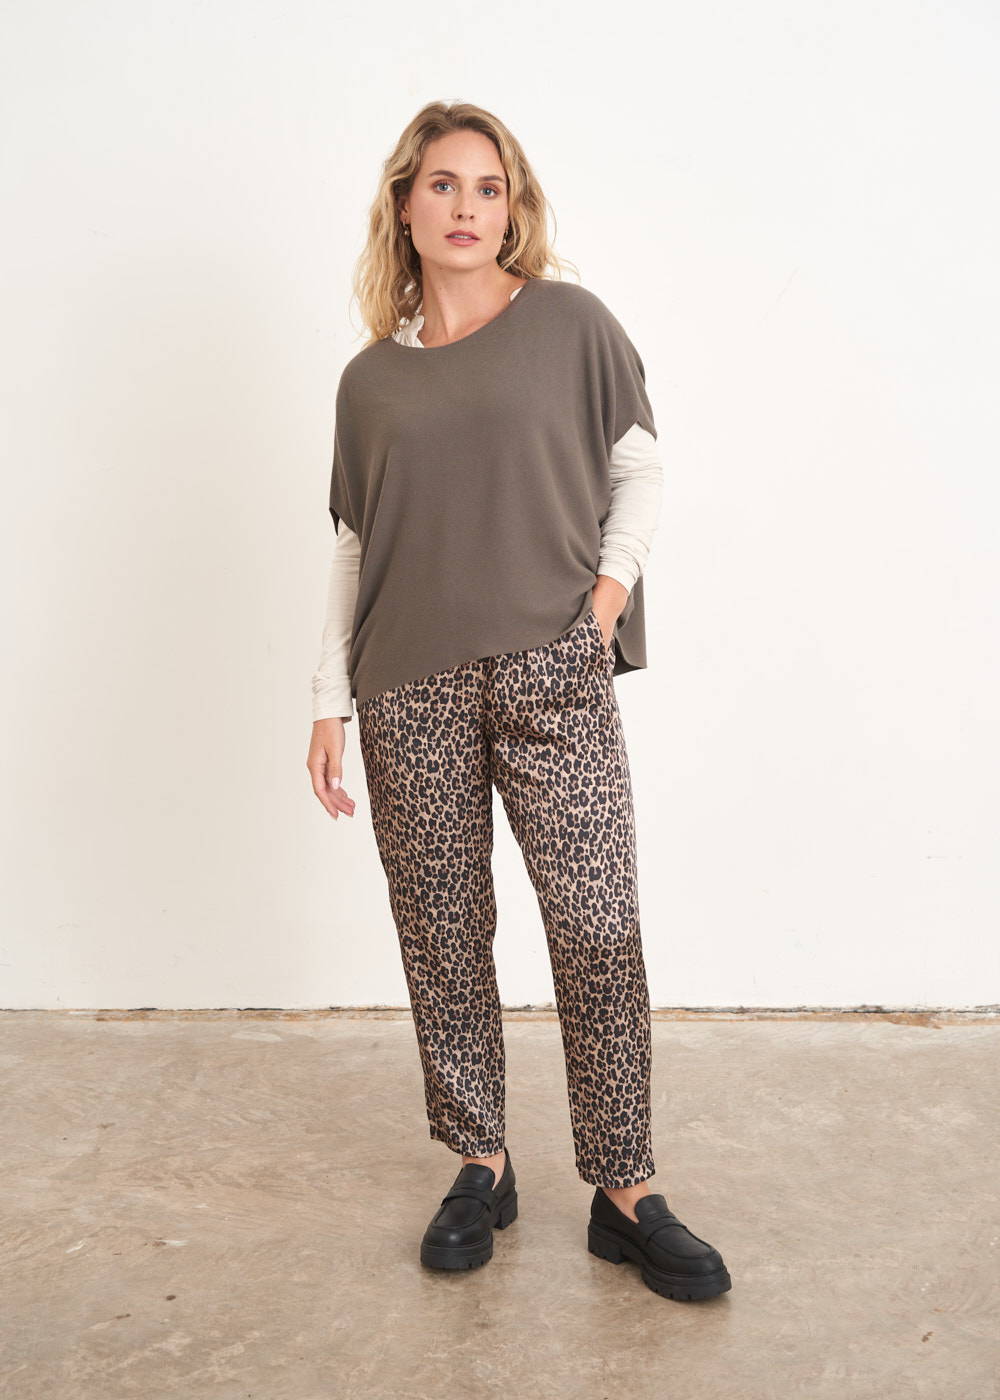 A model wearing a pair of golden leopard print trousers with a dark stone sleeveless blouse over a white top and with black loafers